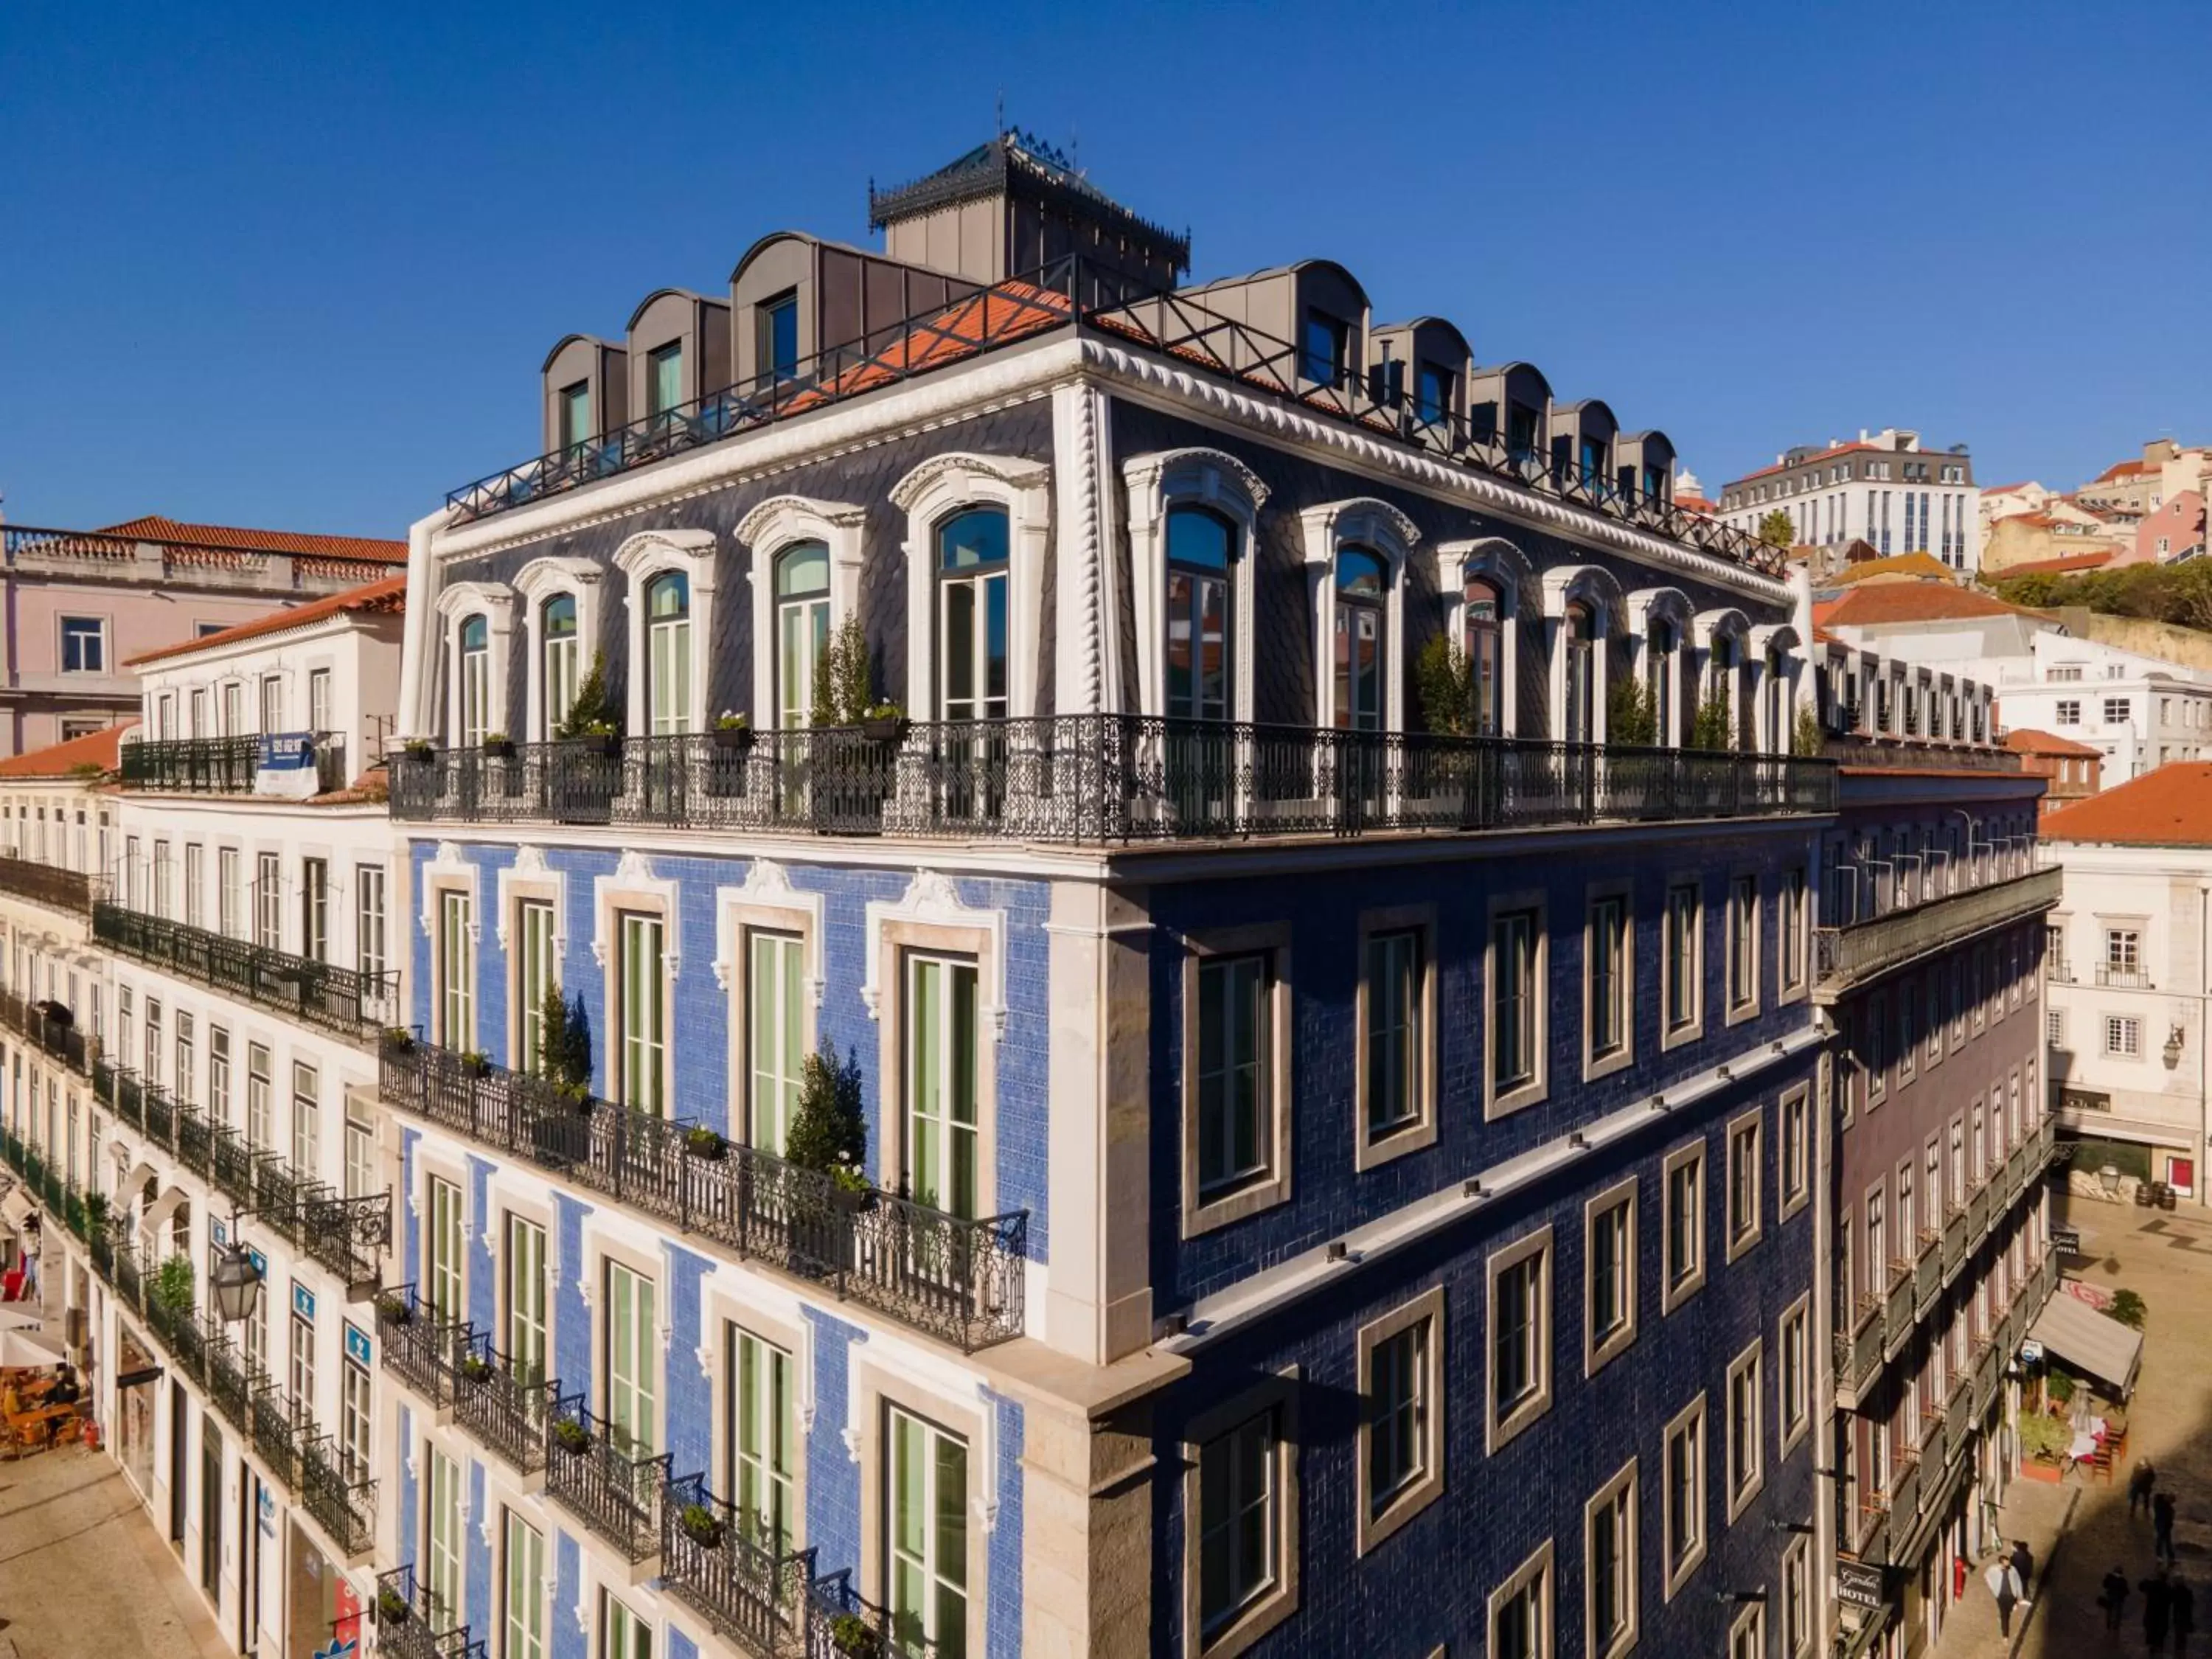 Property Building in Blue Liberdade Hotel